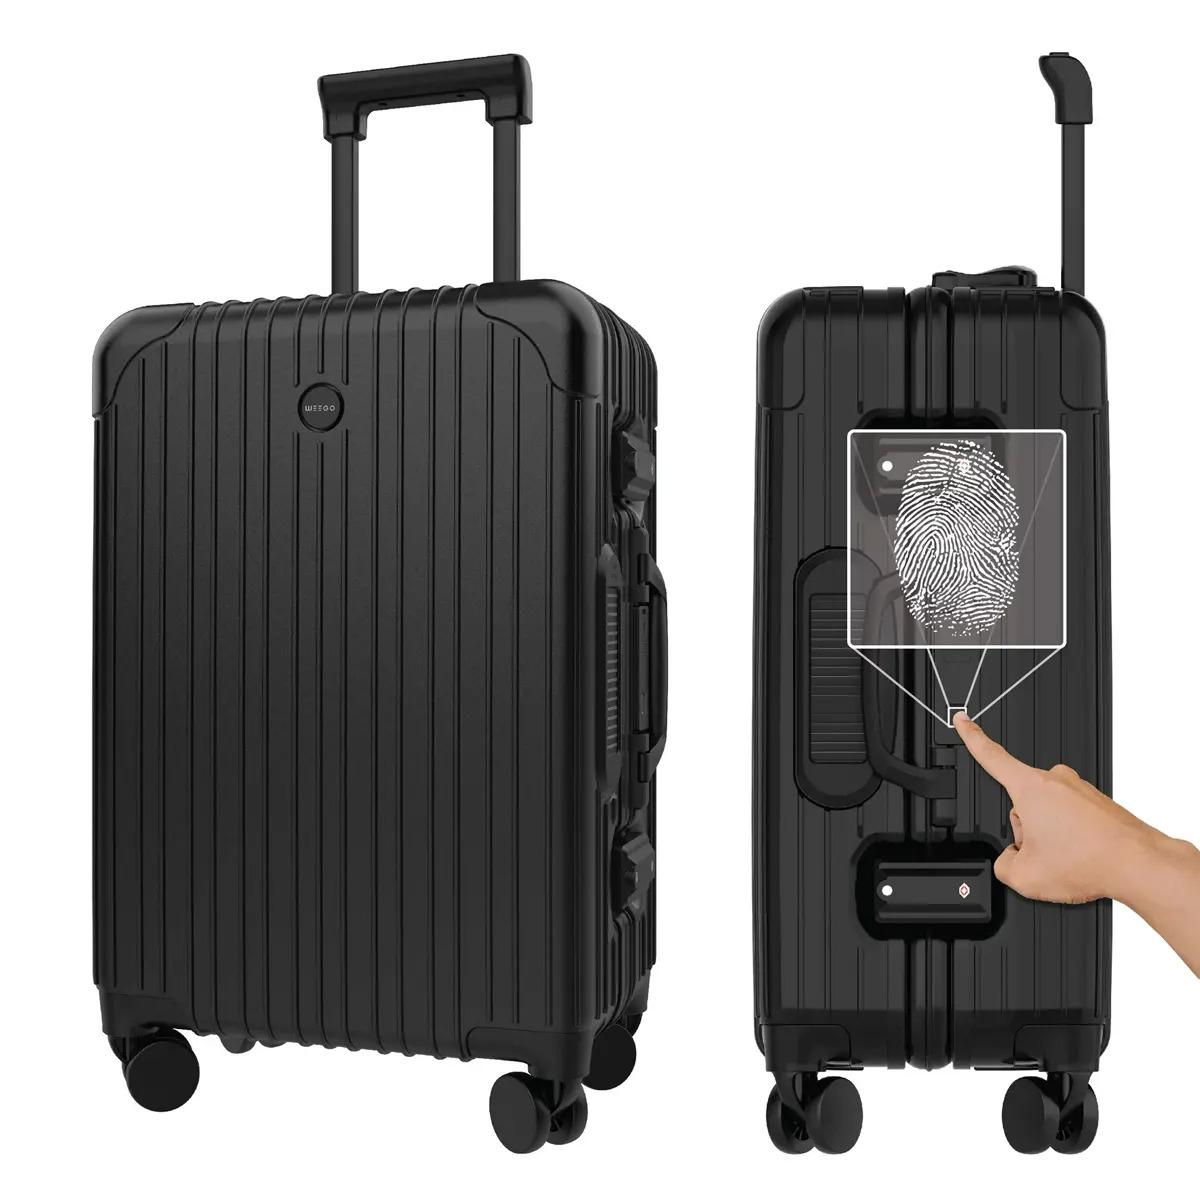 20in Weego Smart Luggage Carry-On Suitcase with Fingerprint Lock for $98 Shipped